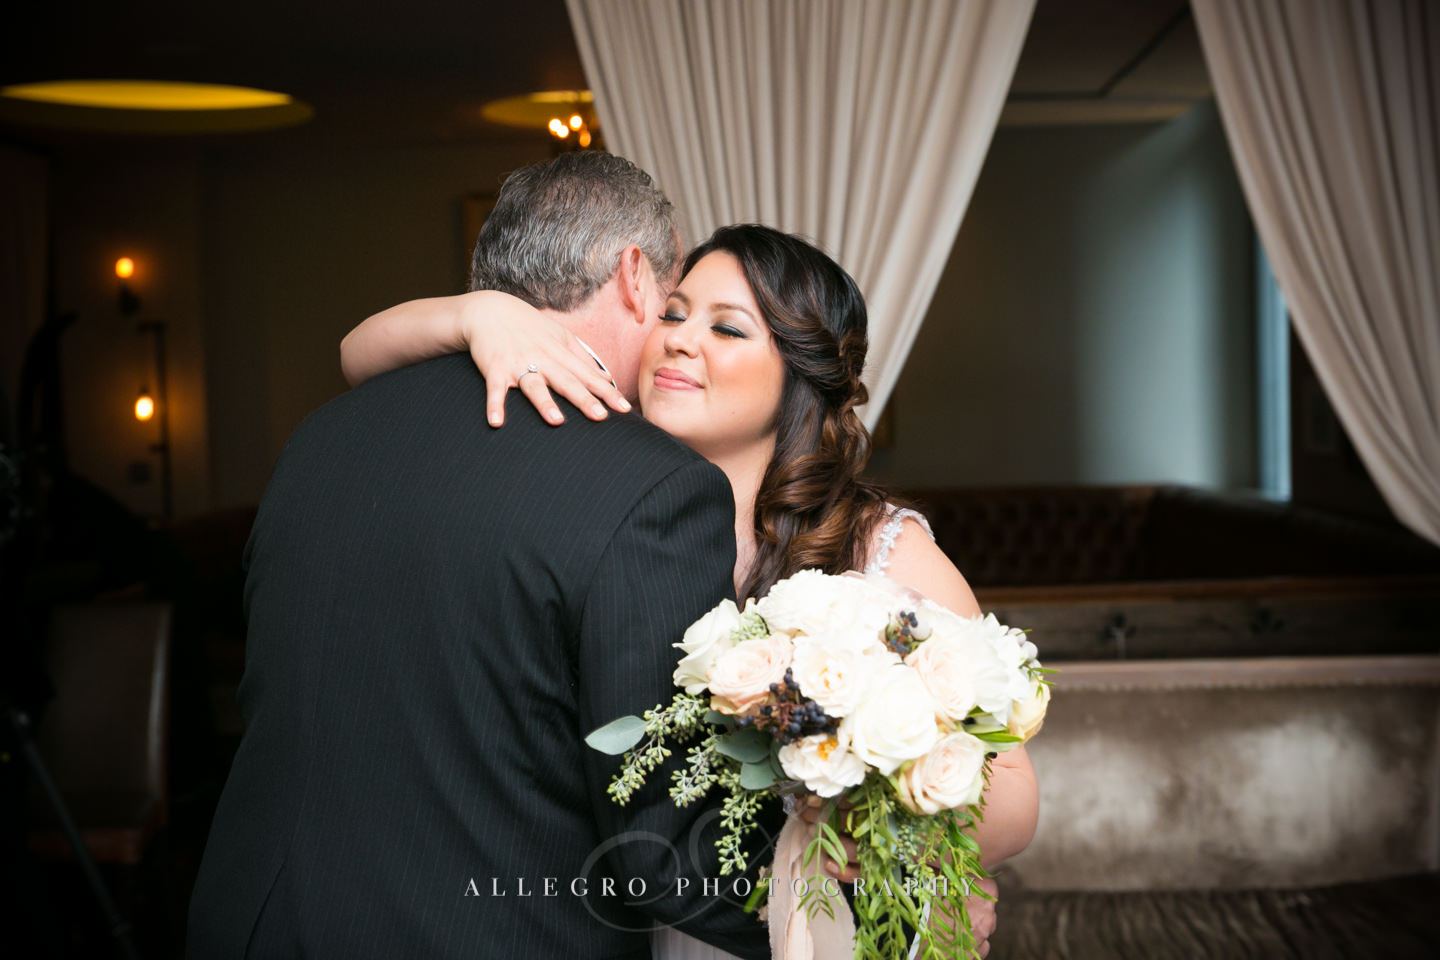 a hug from dad -photo by Allegro Photography